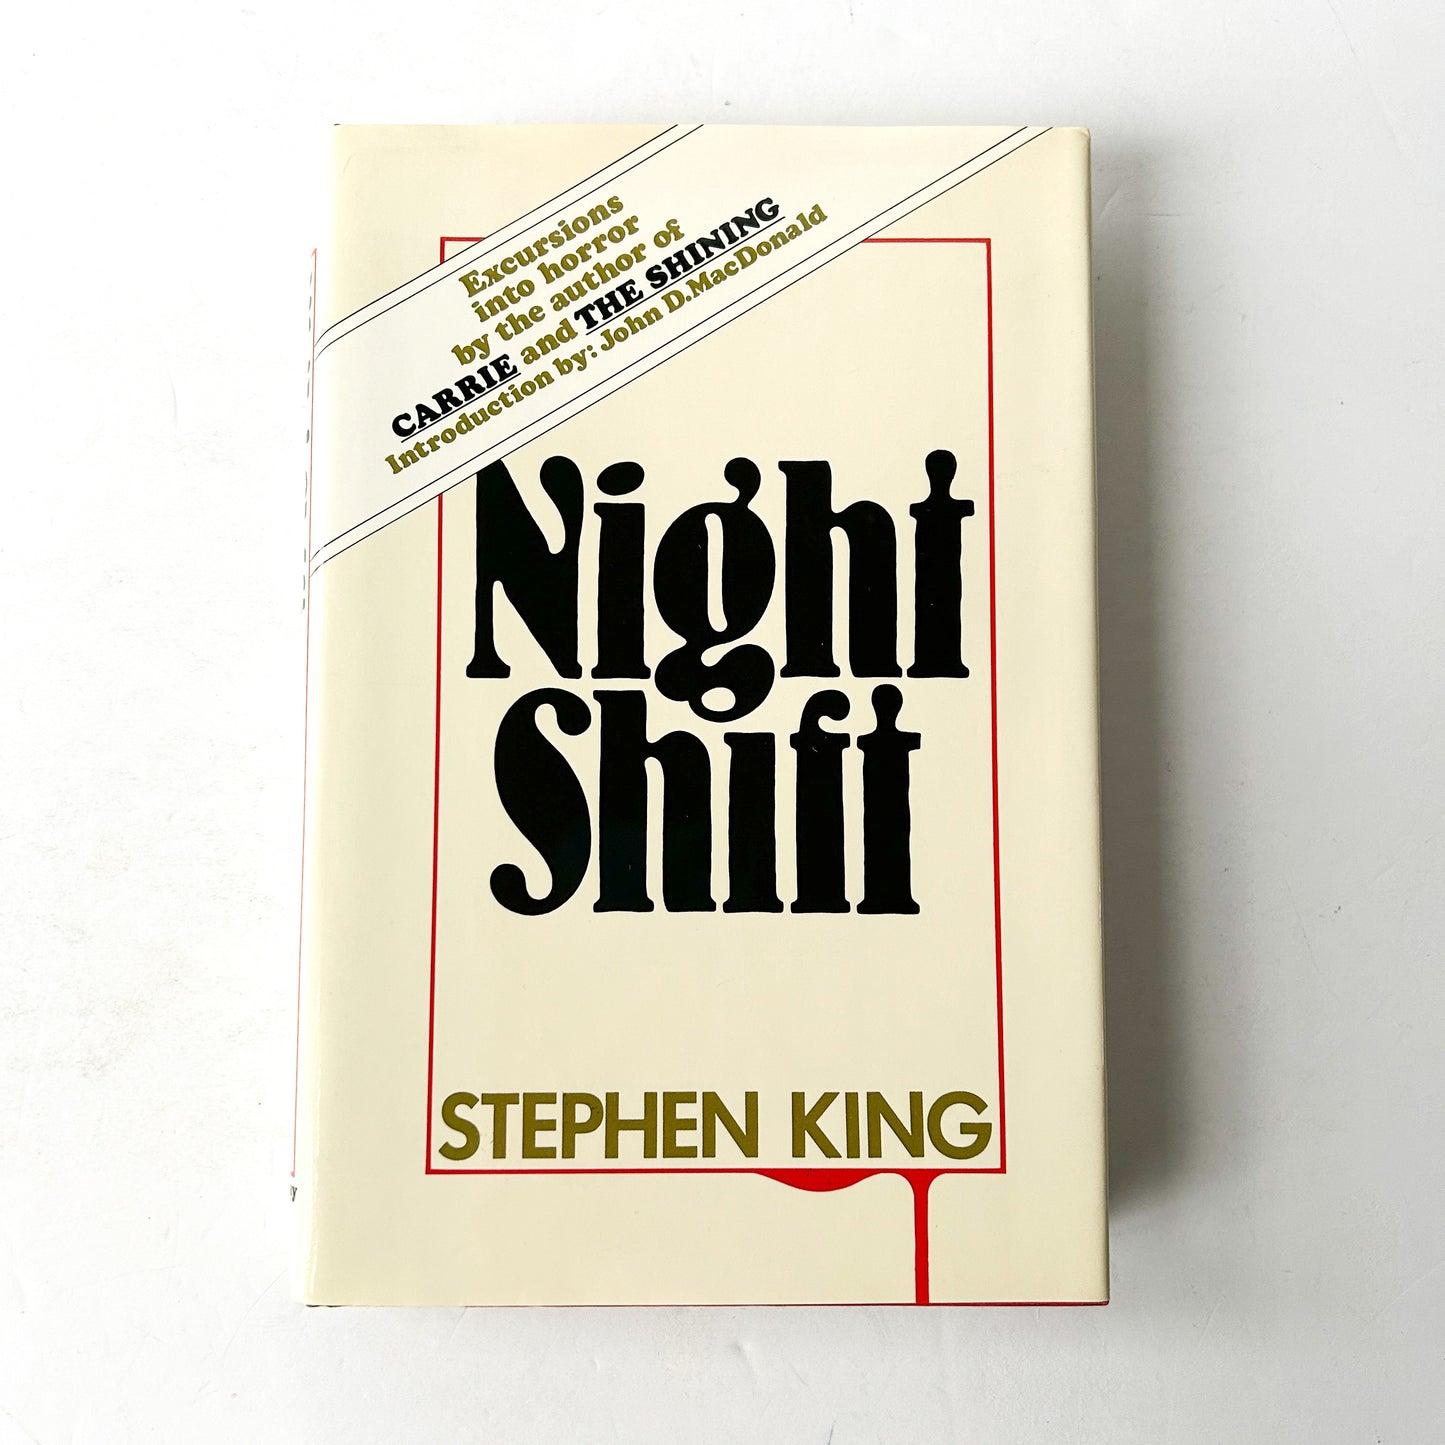 Vintage Night Shift by Stephen King, Hardcover, 1978